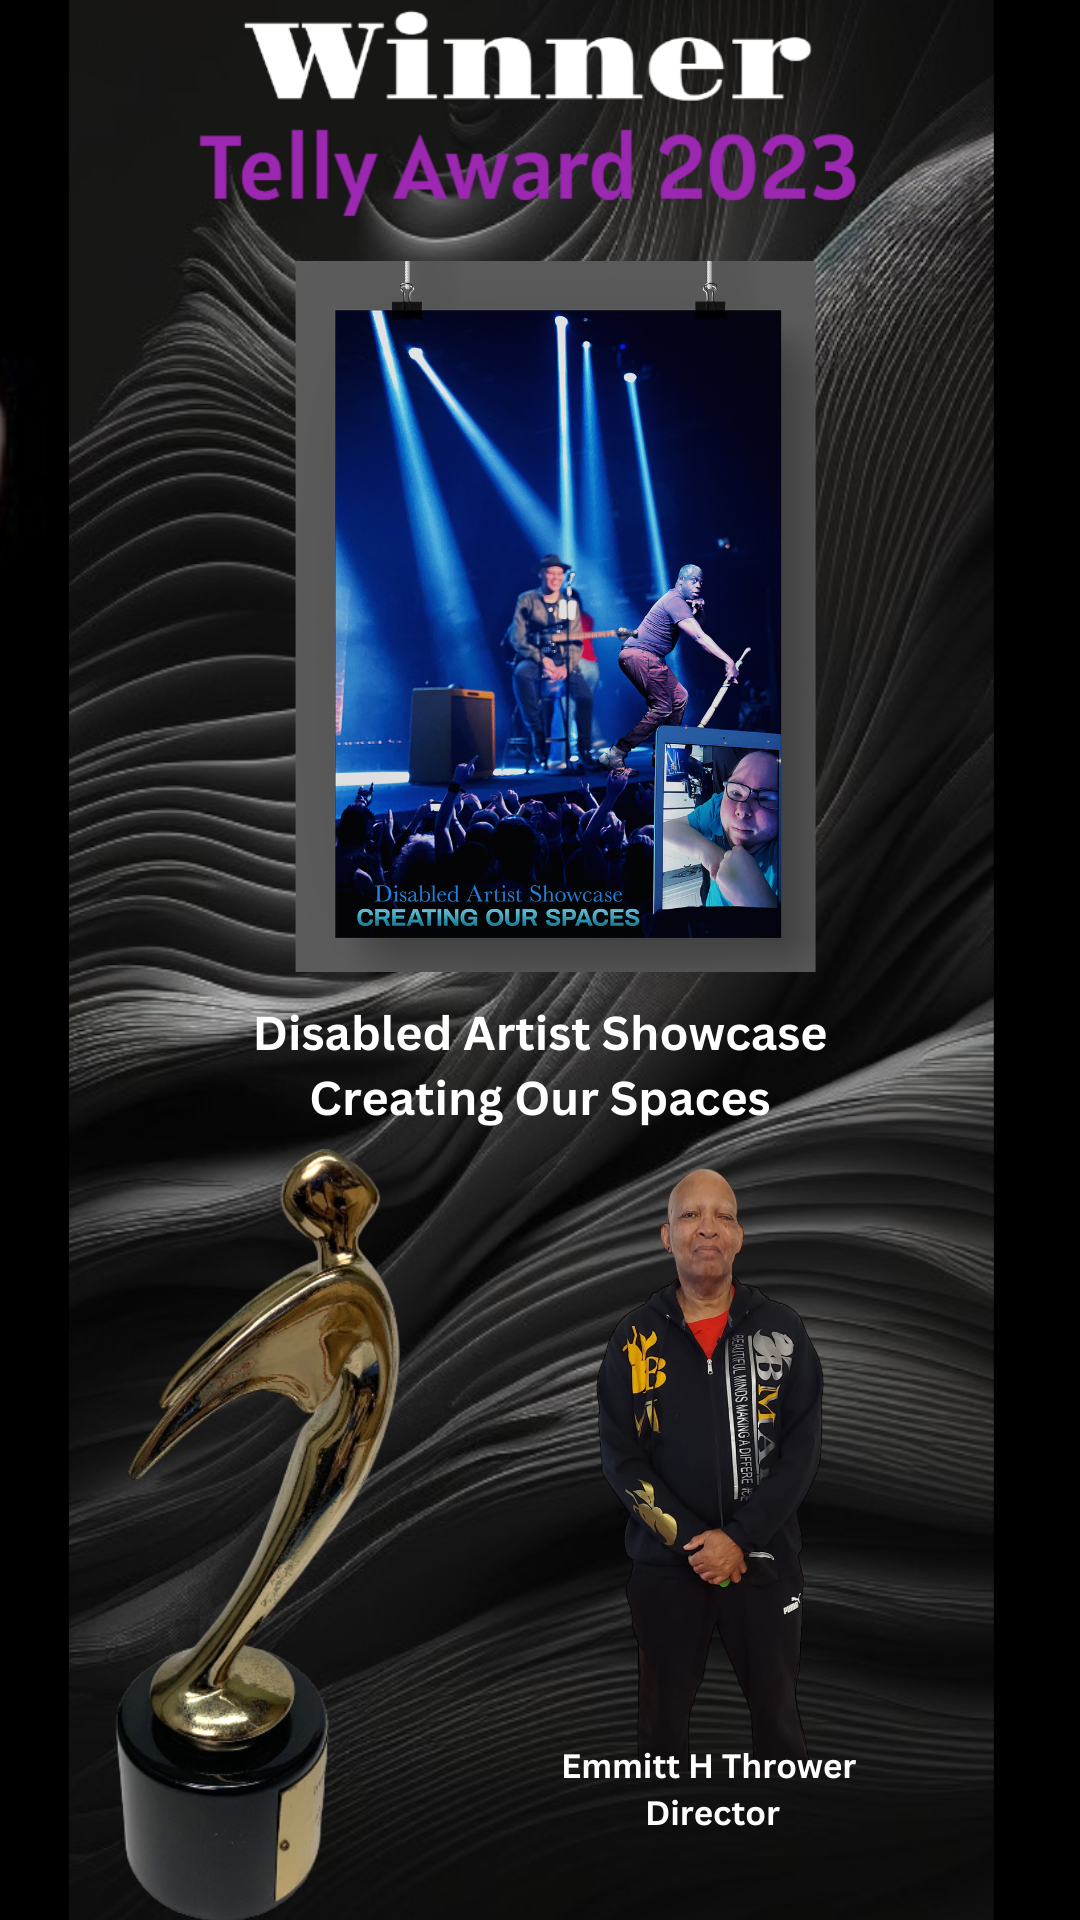 Disabled Artist Showcase: Creating Our Spaces Wins a Telly Award at the 44th Annual Awards Presentation